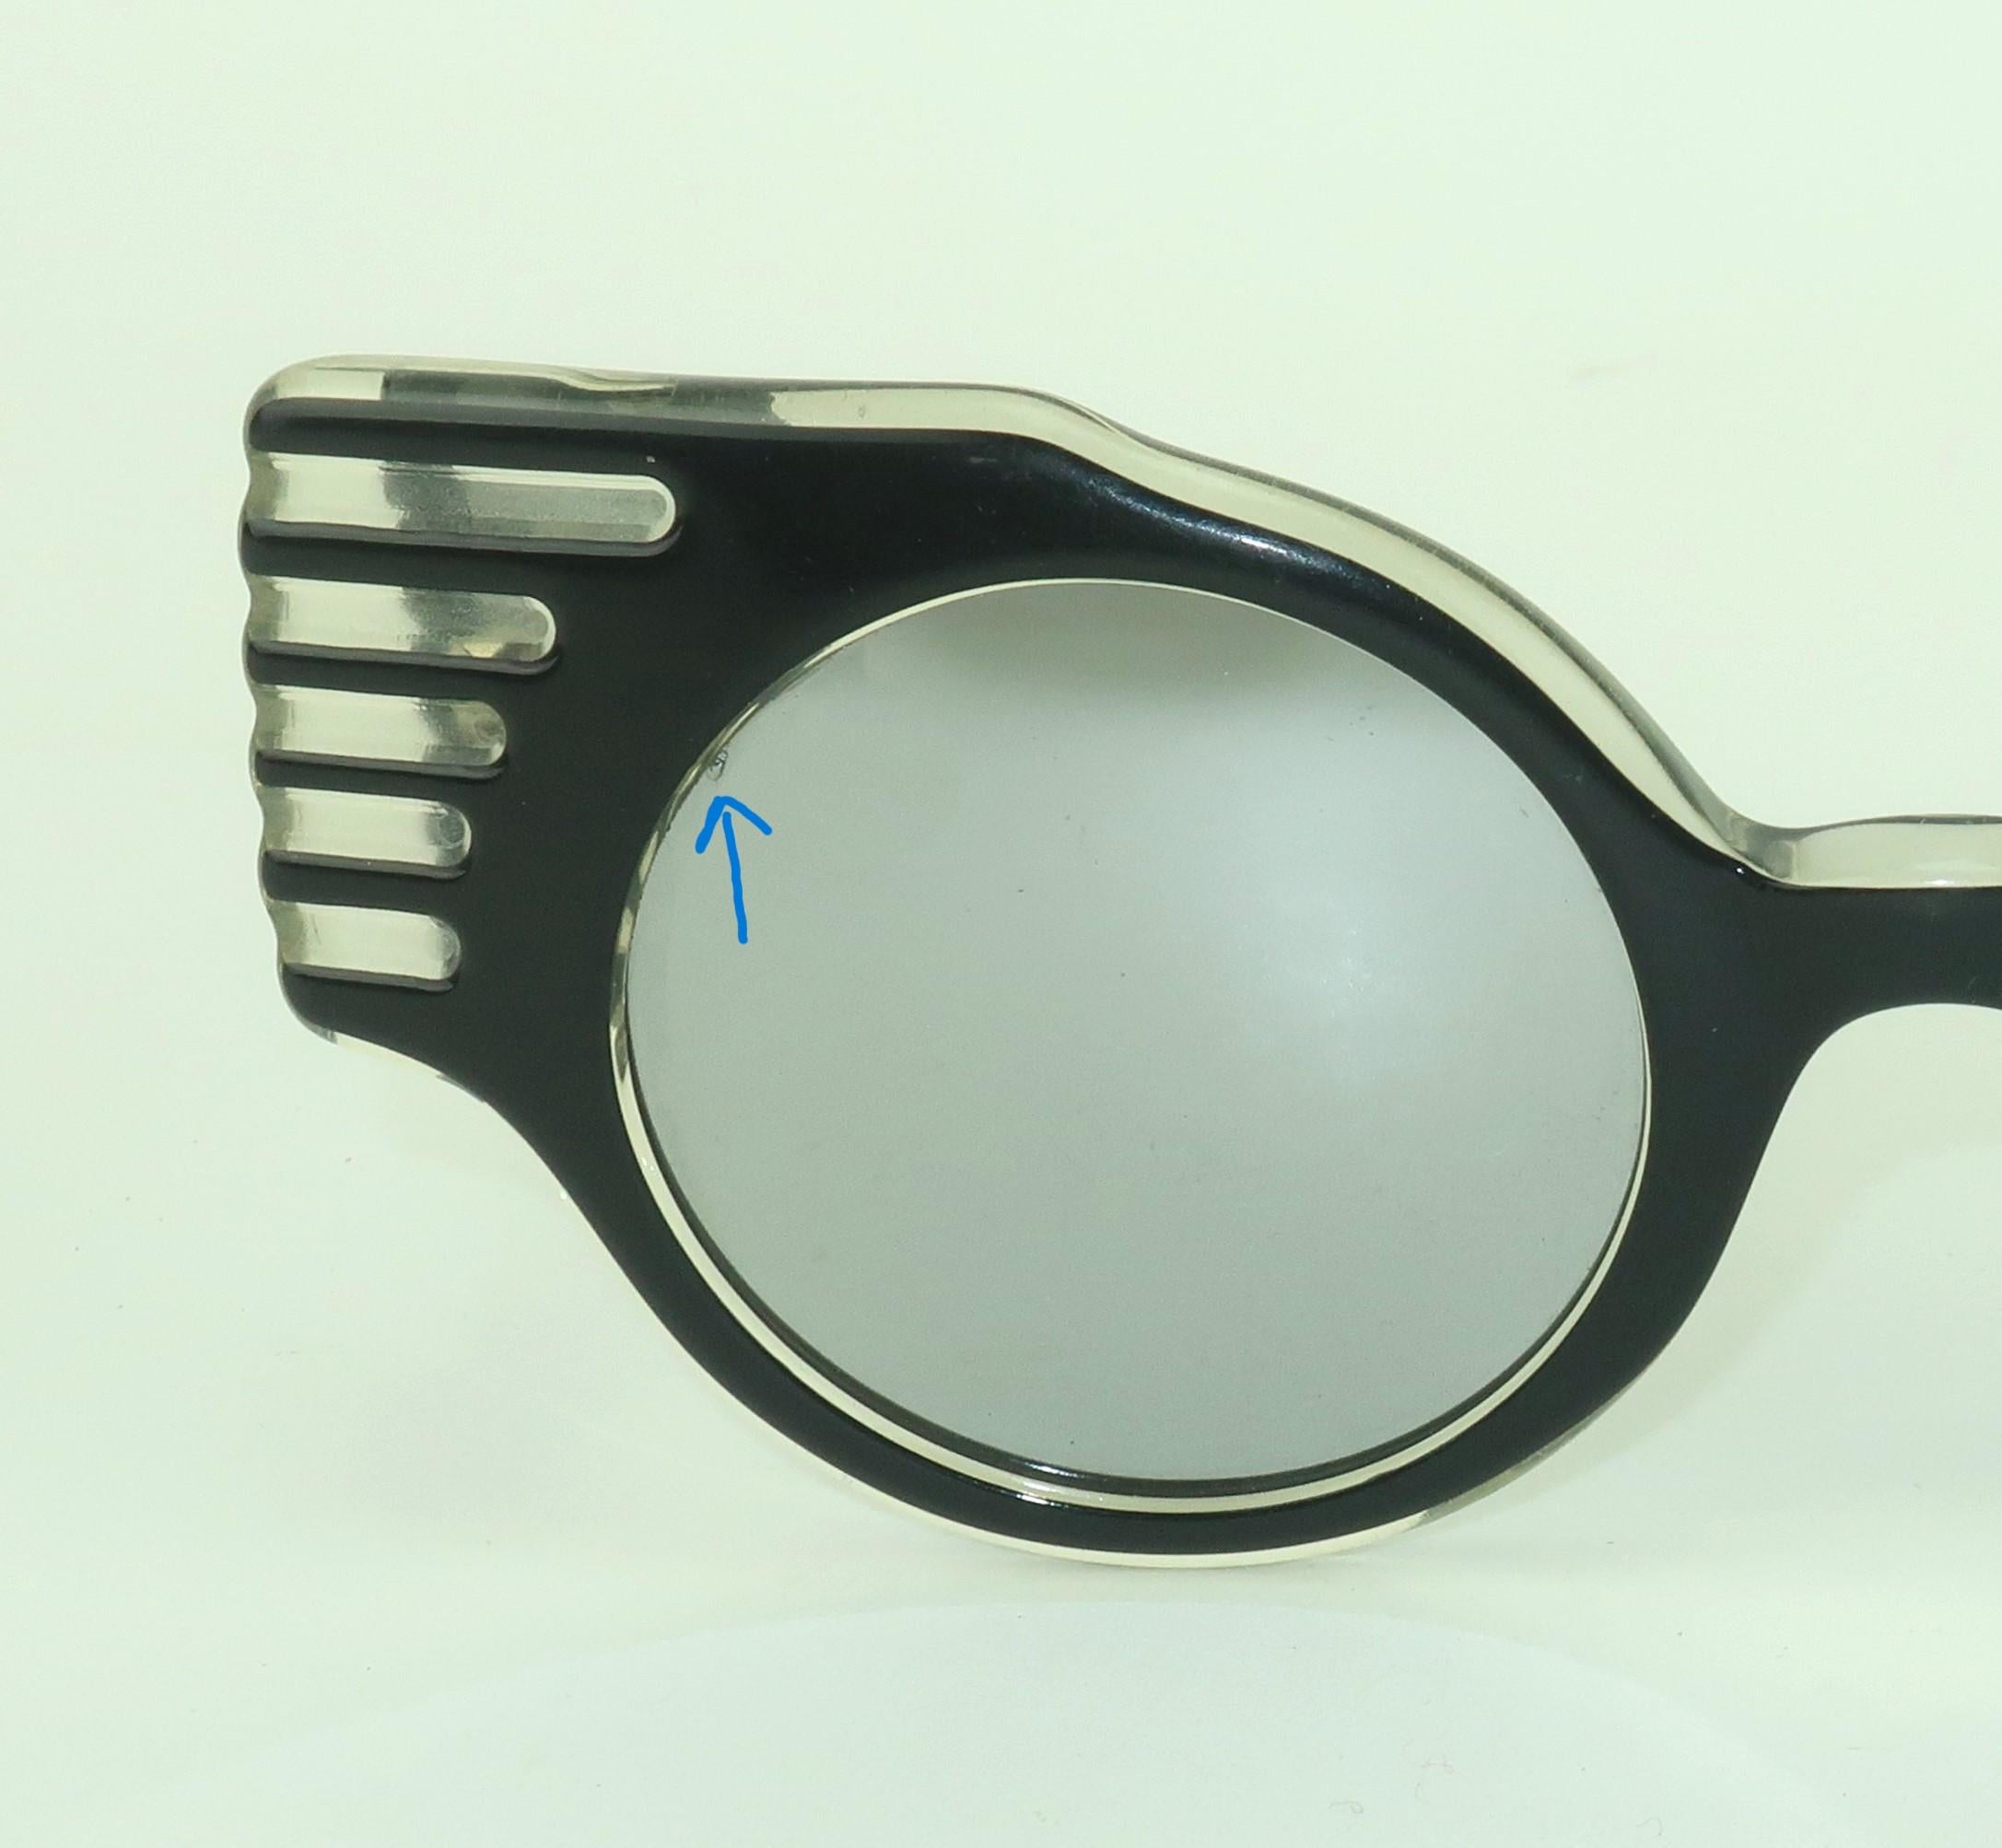 Michele Lamy French Black 'Cadillac Tailfin' Sunglasses, 1980's For Sale 8